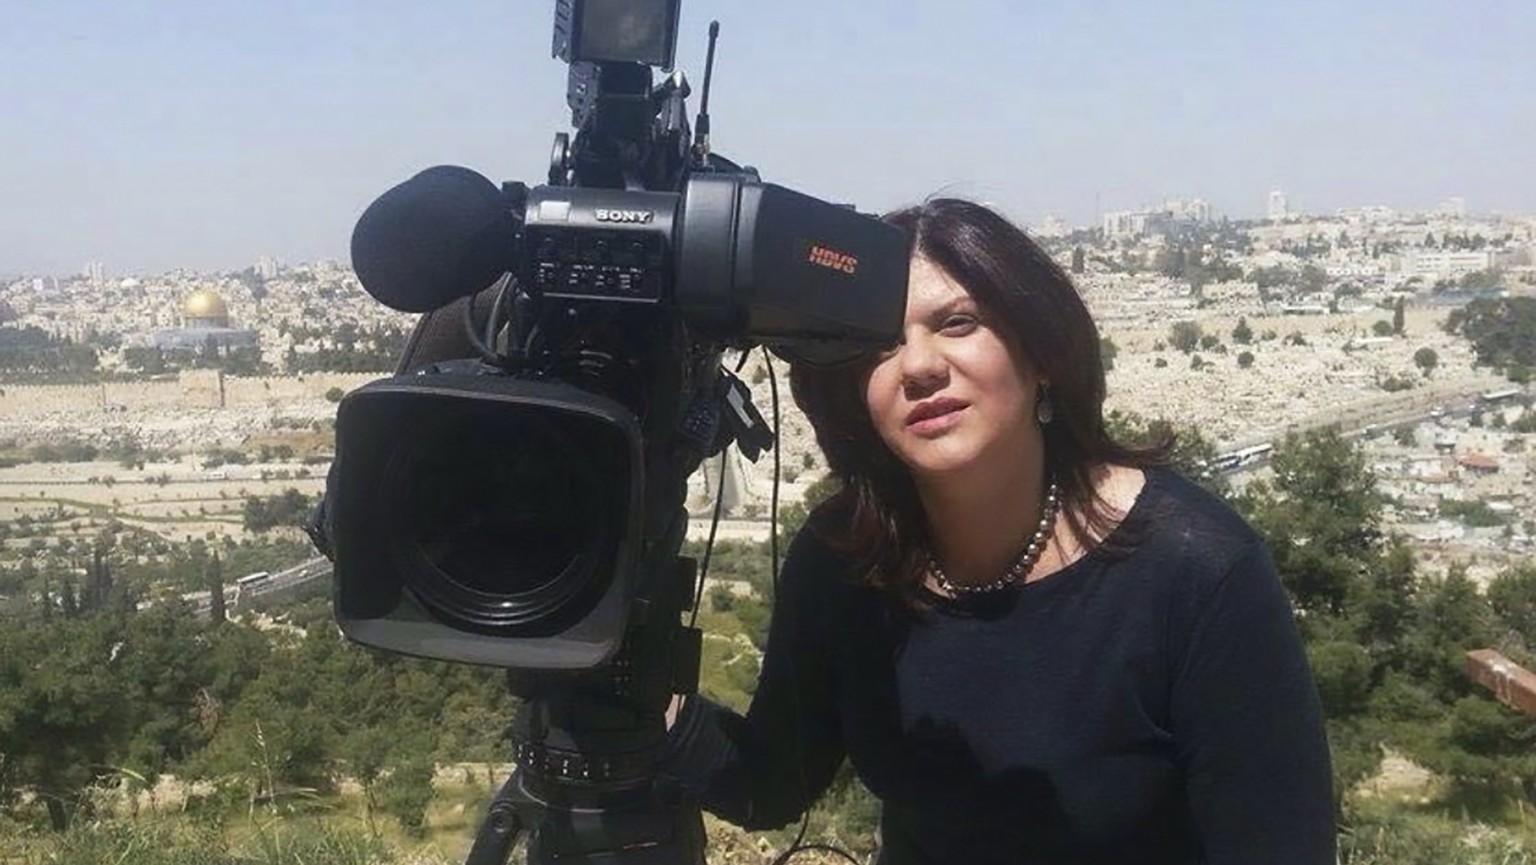 In this undated photo provided by Al Jazeera, Shireen Abu Akleh, a journalist for Al Jazeera network, stands next to a TV camera in an area where the Dome of the Rock shrine at Al-Aqsa Mosque in the O ...